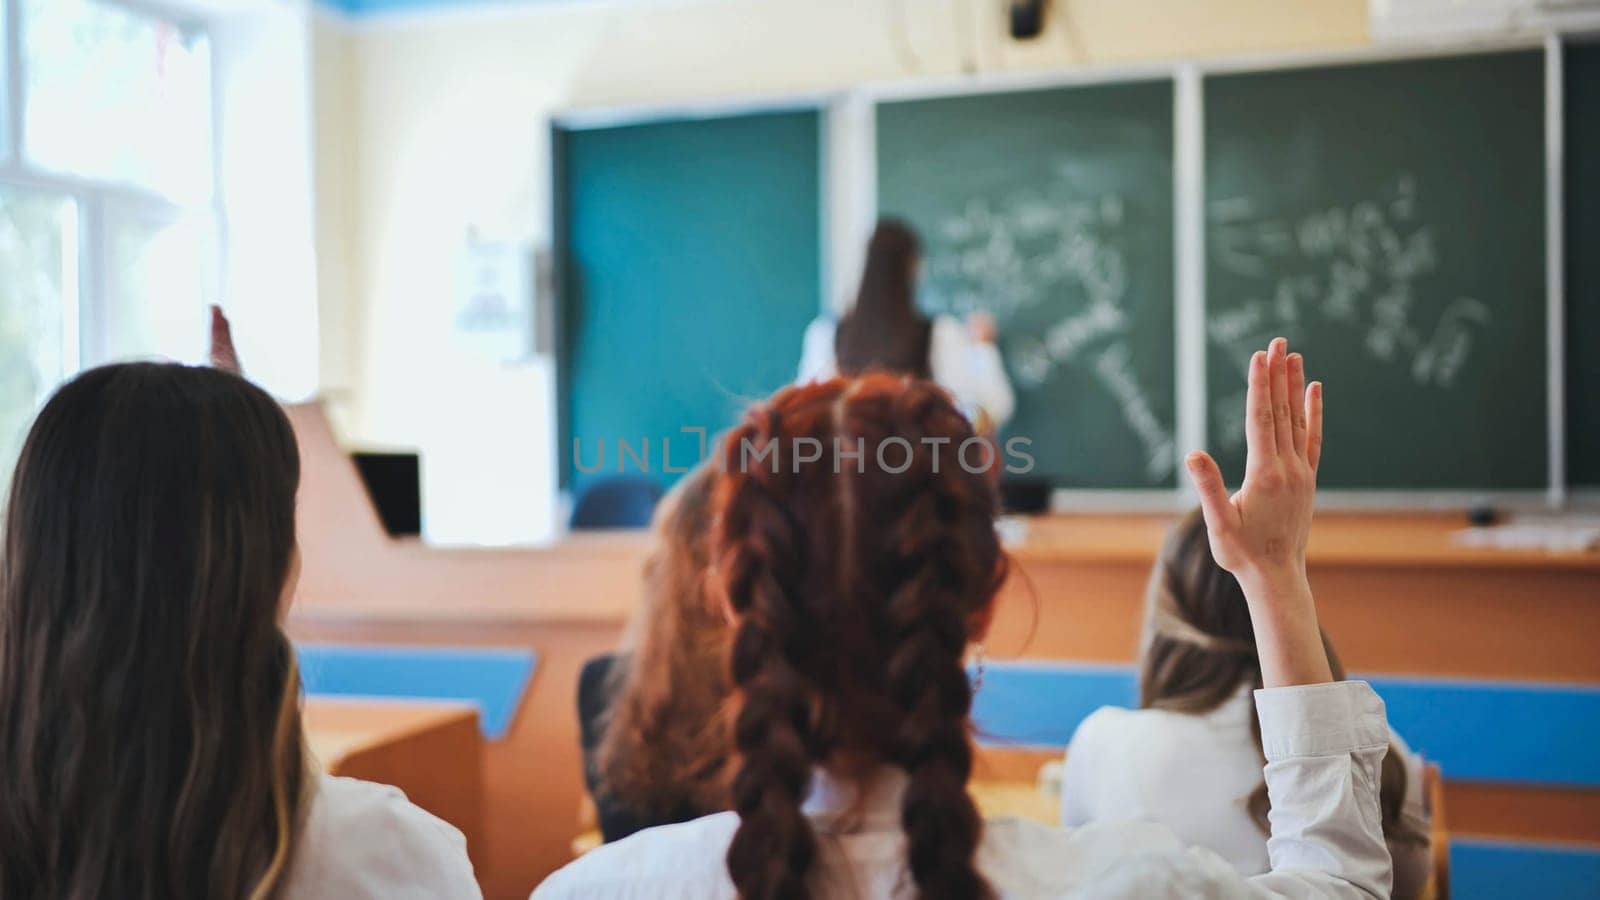 Intelligent group of young school children all raising their hands in the air to answer a question posed by the female teacher, view from behind